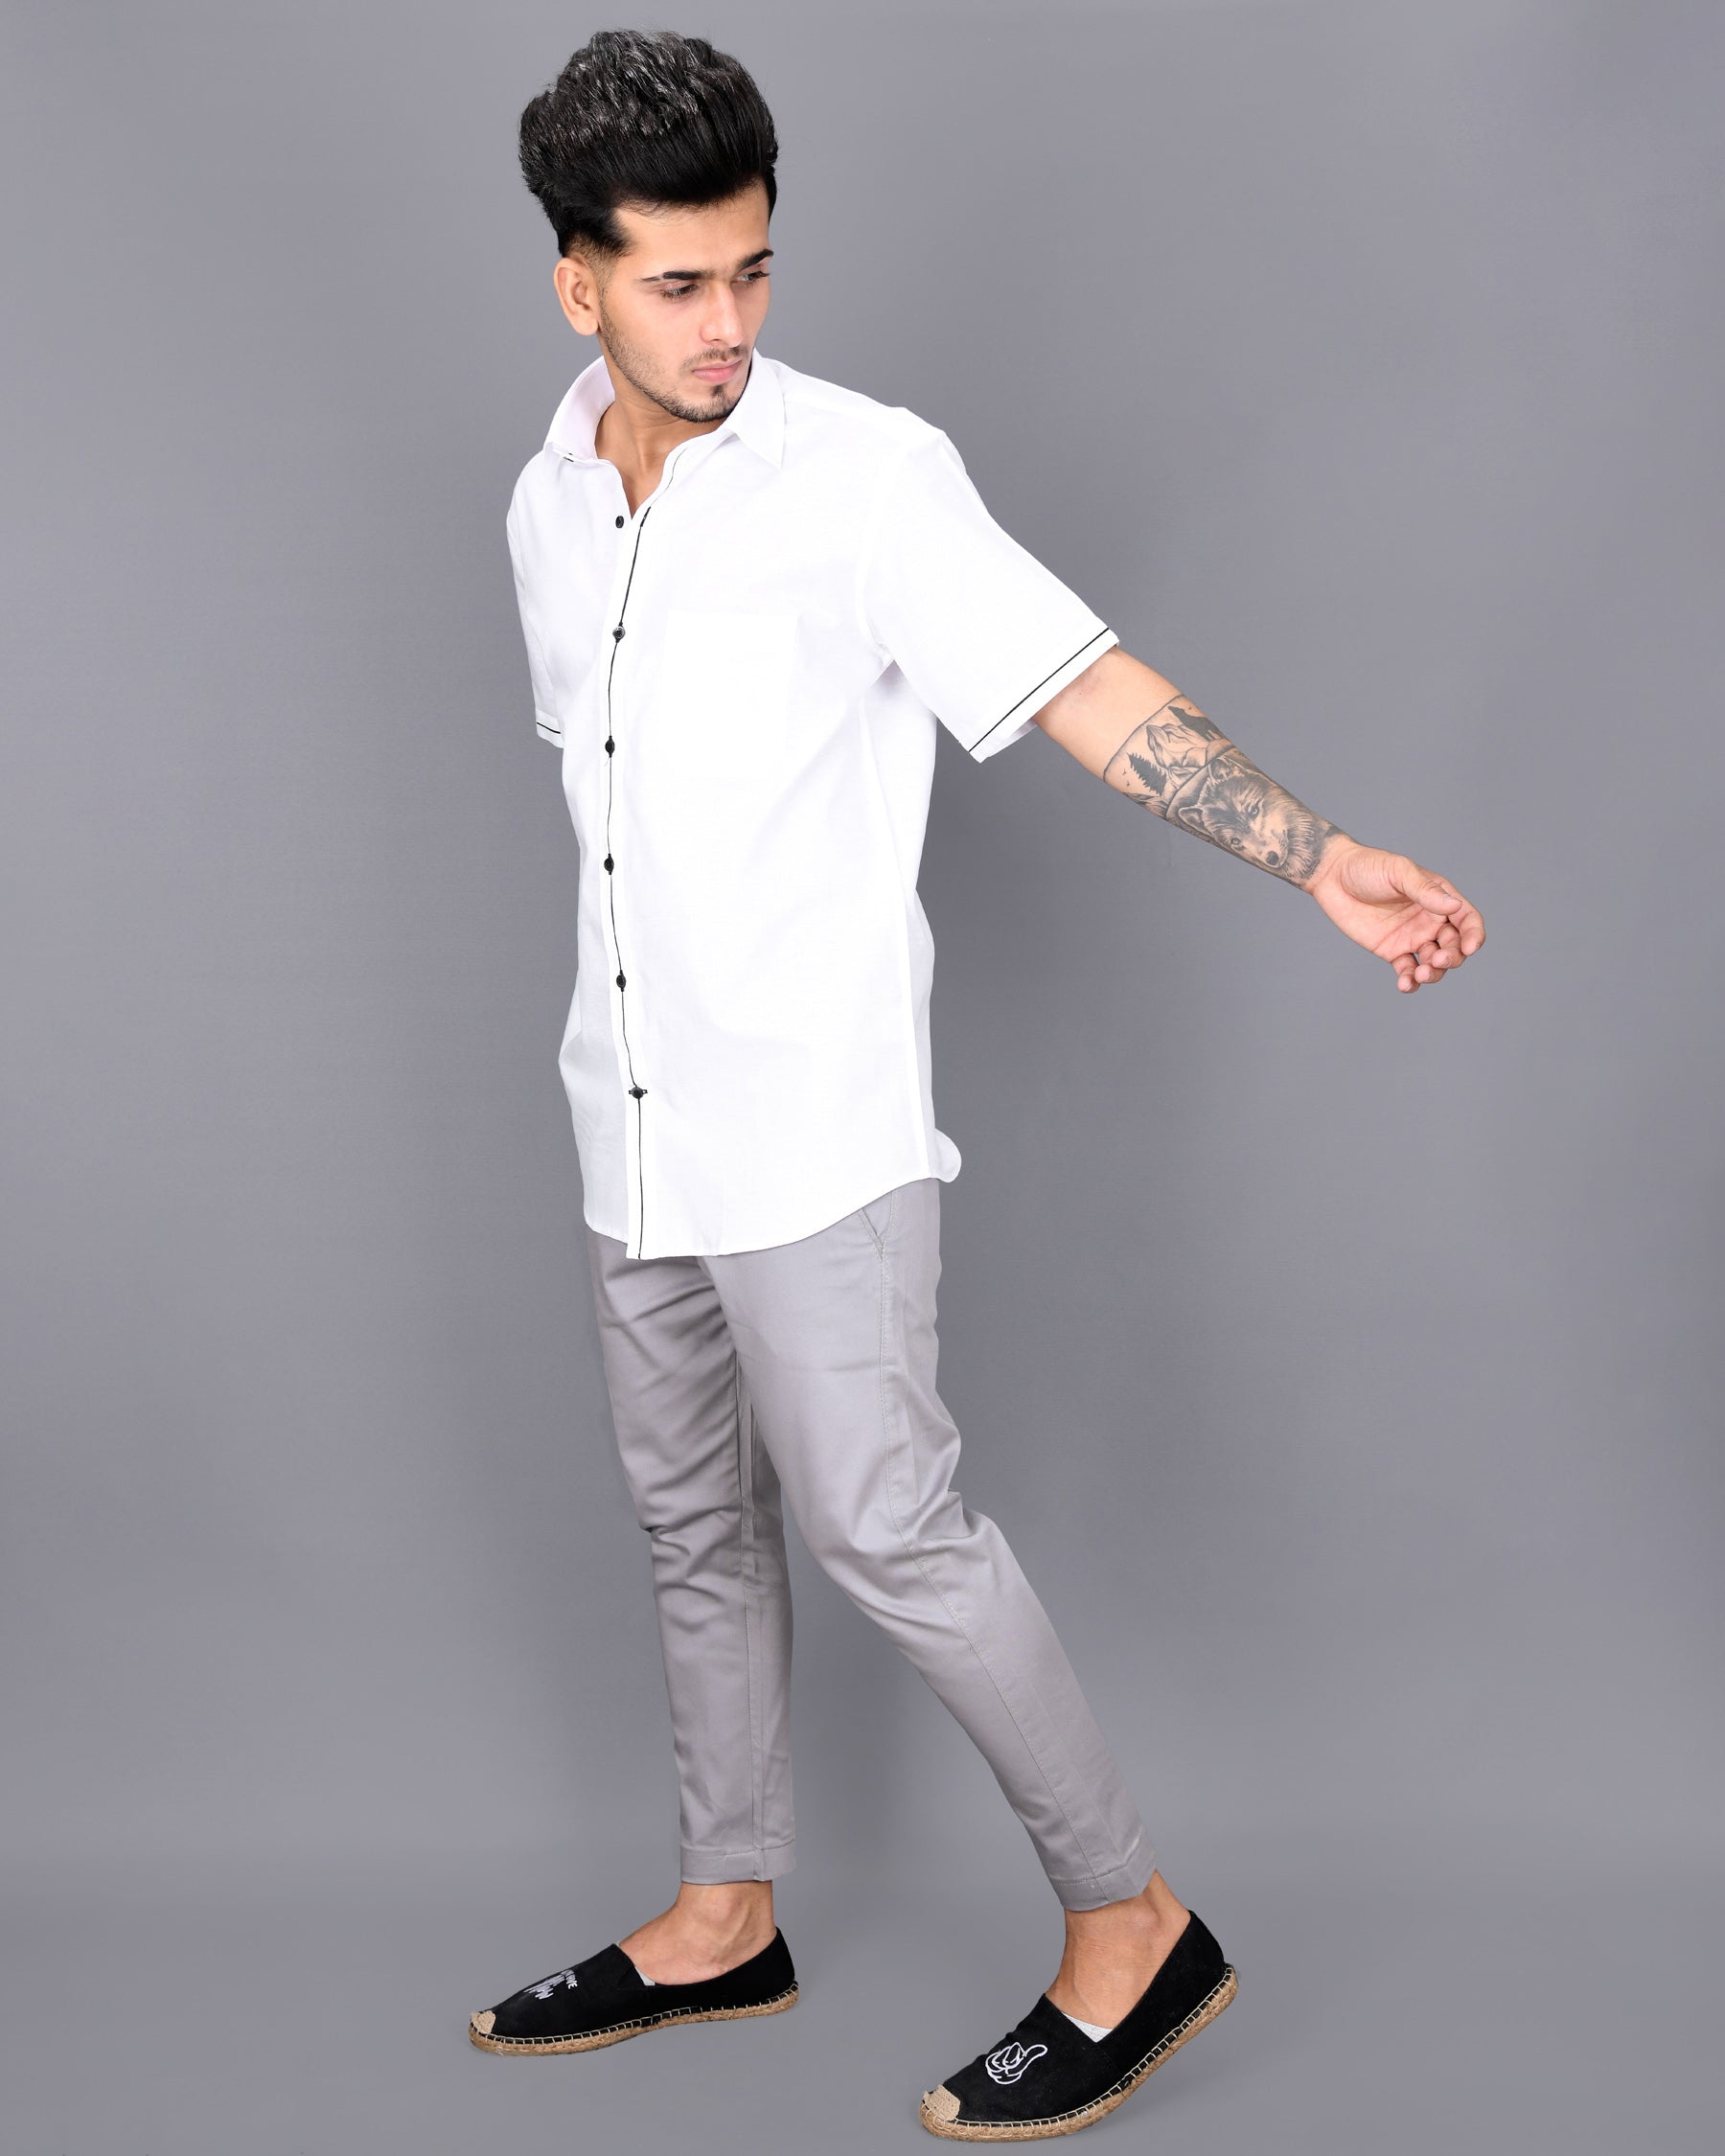 Bright White with Black Centre Piping Luxurious Linen Shirt 3191BLK-P20-38, 3191BLK-P20-H-38, 3191BLK-P20-39, 3191BLK-P20-H-39, 3191BLK-P20-40, 3191BLK-P20-H-40, 3191BLK-P20-42, 3191BLK-P20-H-42, 3191BLK-P20-44, 3191BLK-P20-H-44, 3191BLK-P20-46, 3191BLK-P20-H-46, 3191BLK-P20-48, 3191BLK-P20-H-48, 3191BLK-P20-50, 3191BLK-P20-H-50, 3191BLK-P20-52, 3191BLK-P20-H-52